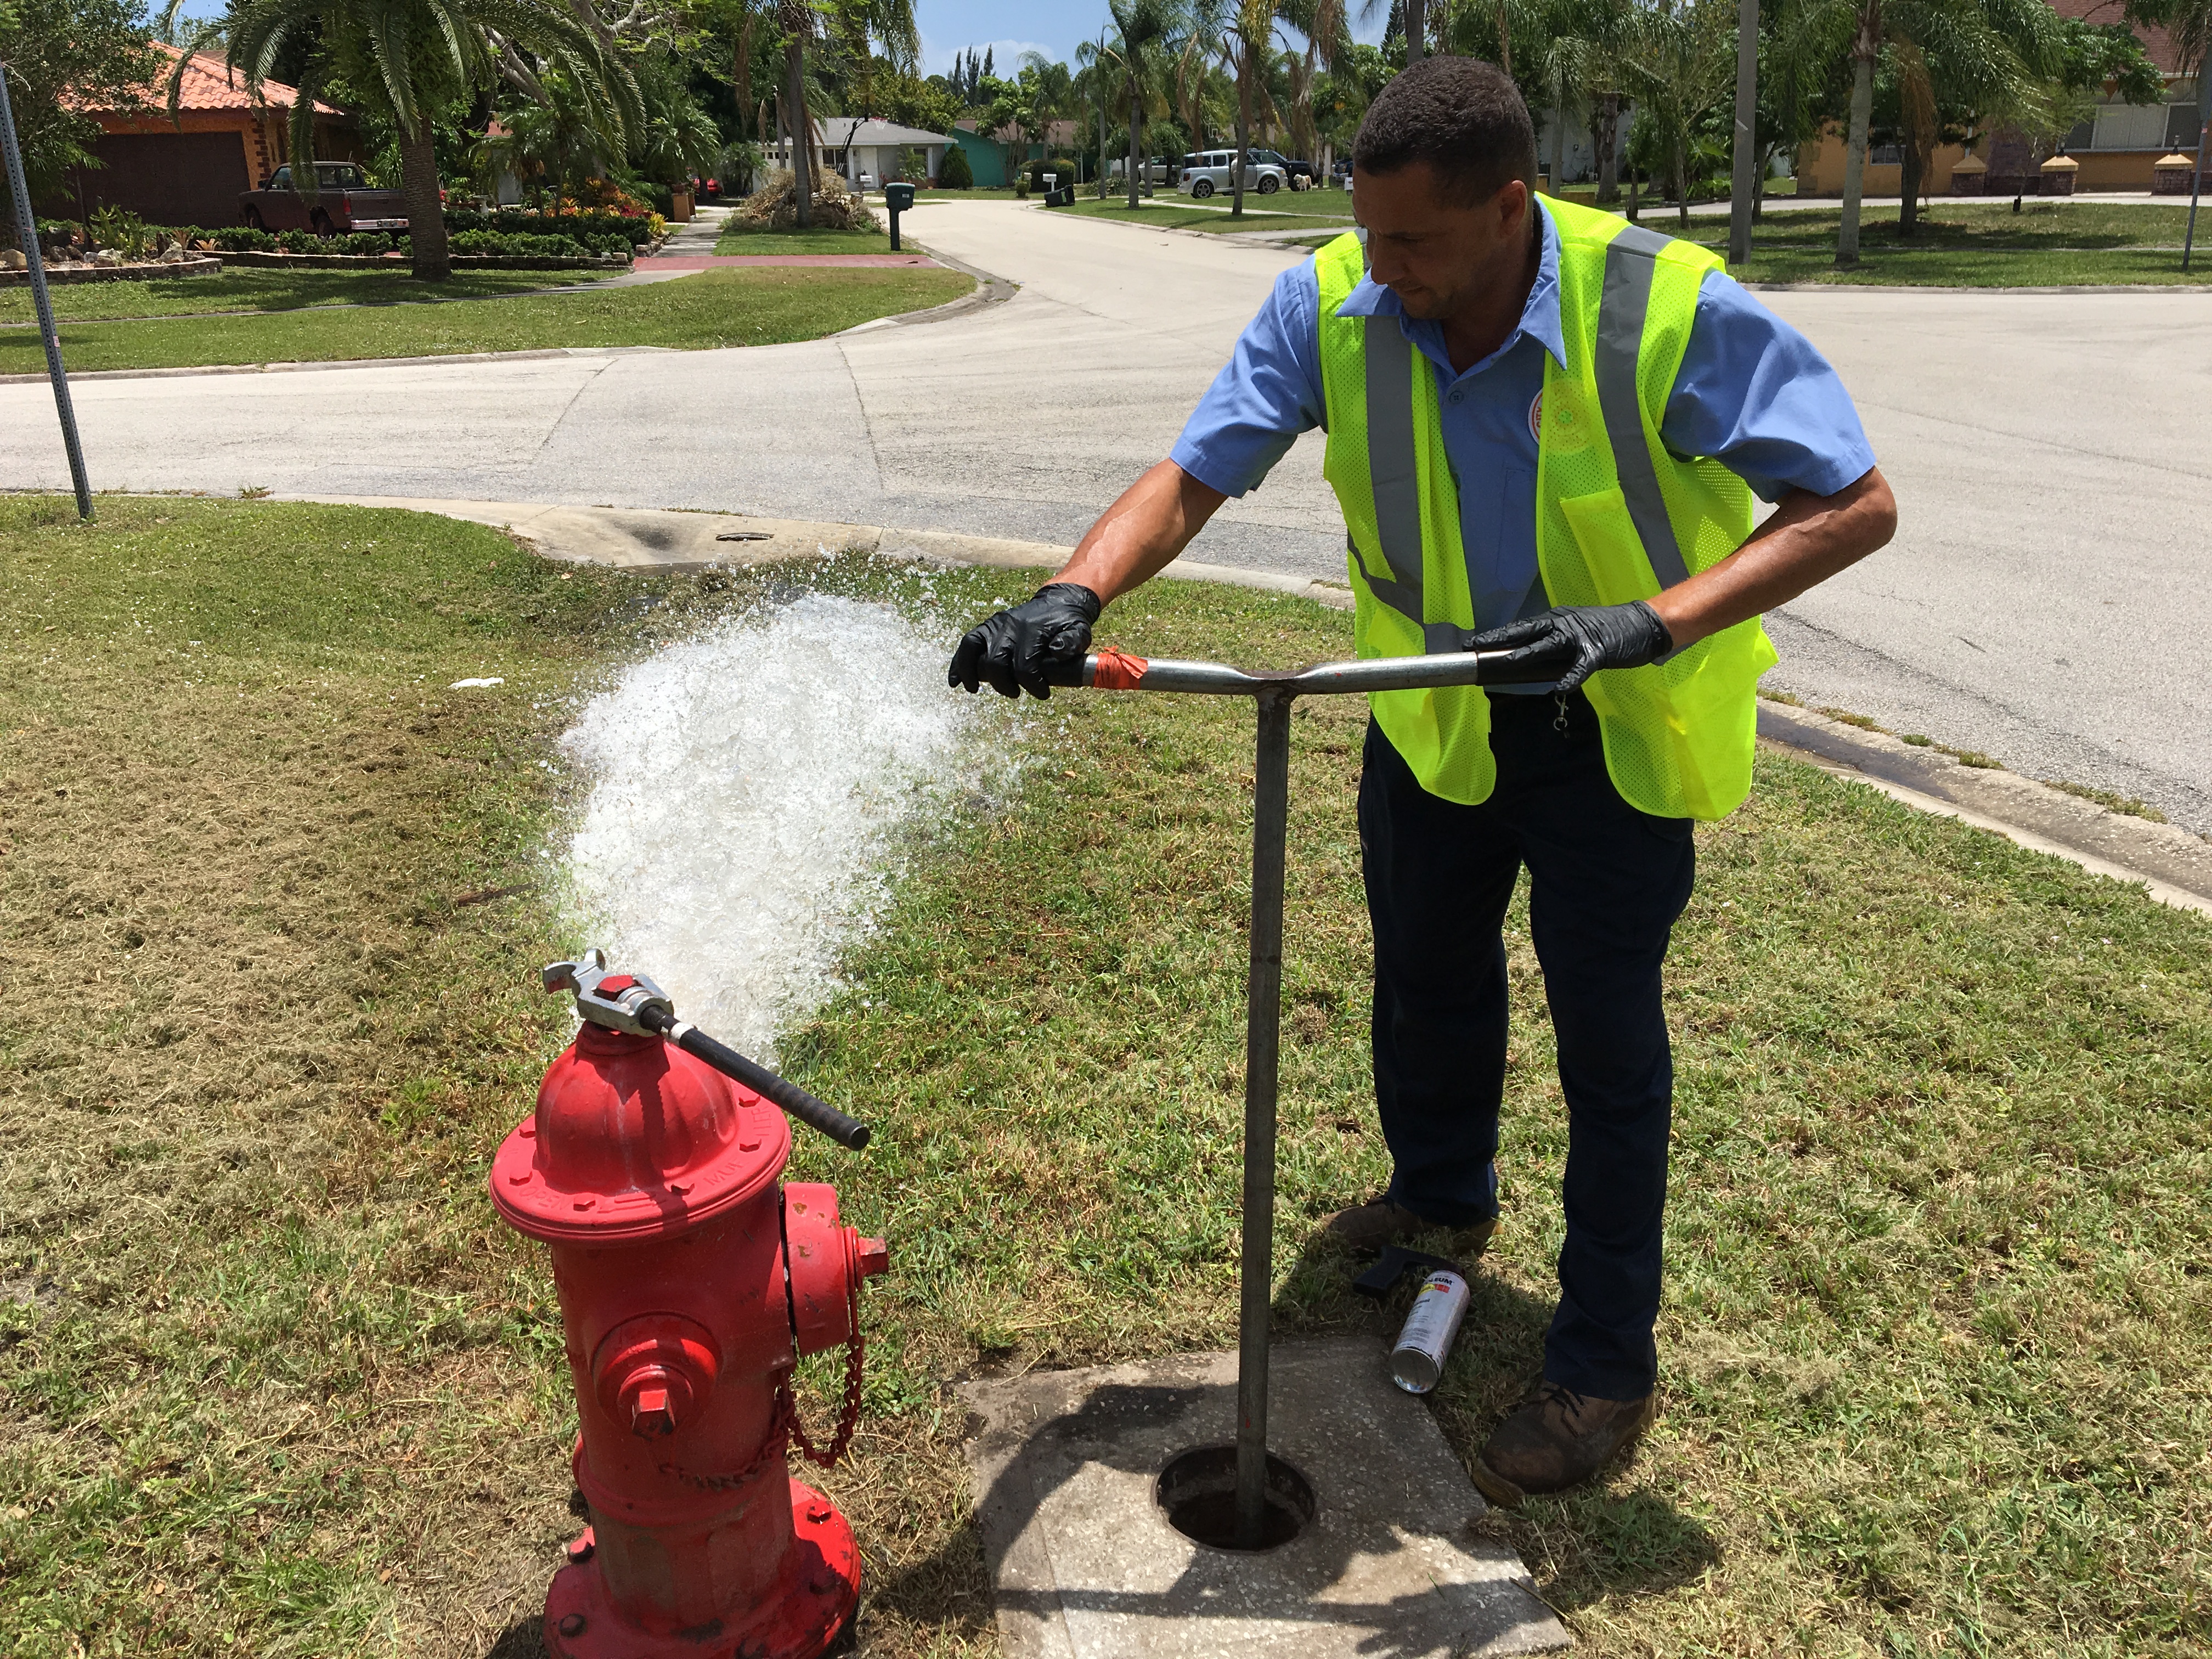 Water distribution employee opening a fire hydrant to let the water flow out